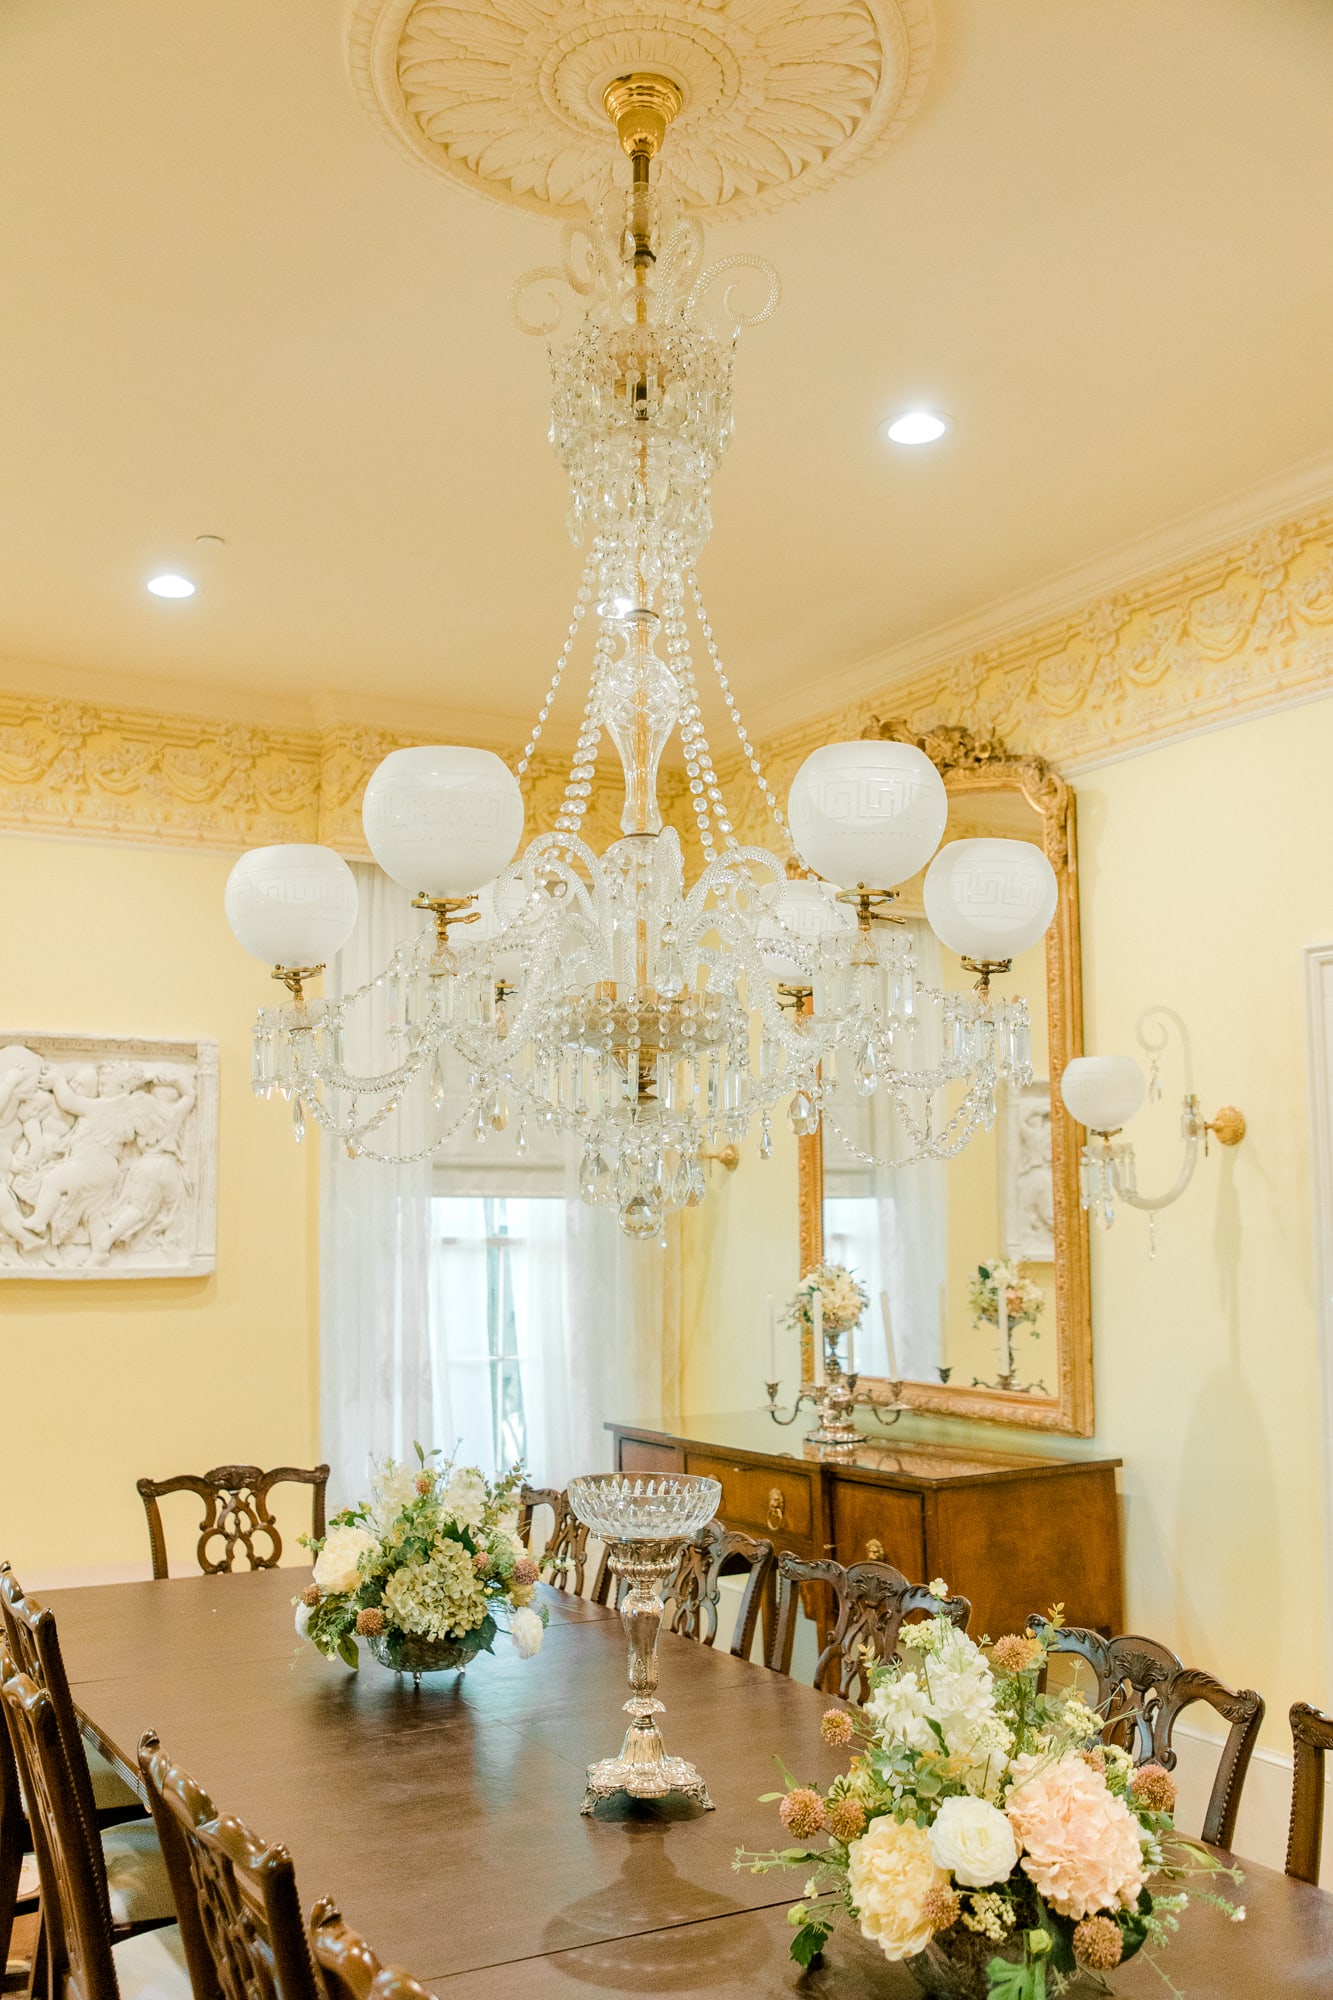 Isom Place interior chandelier